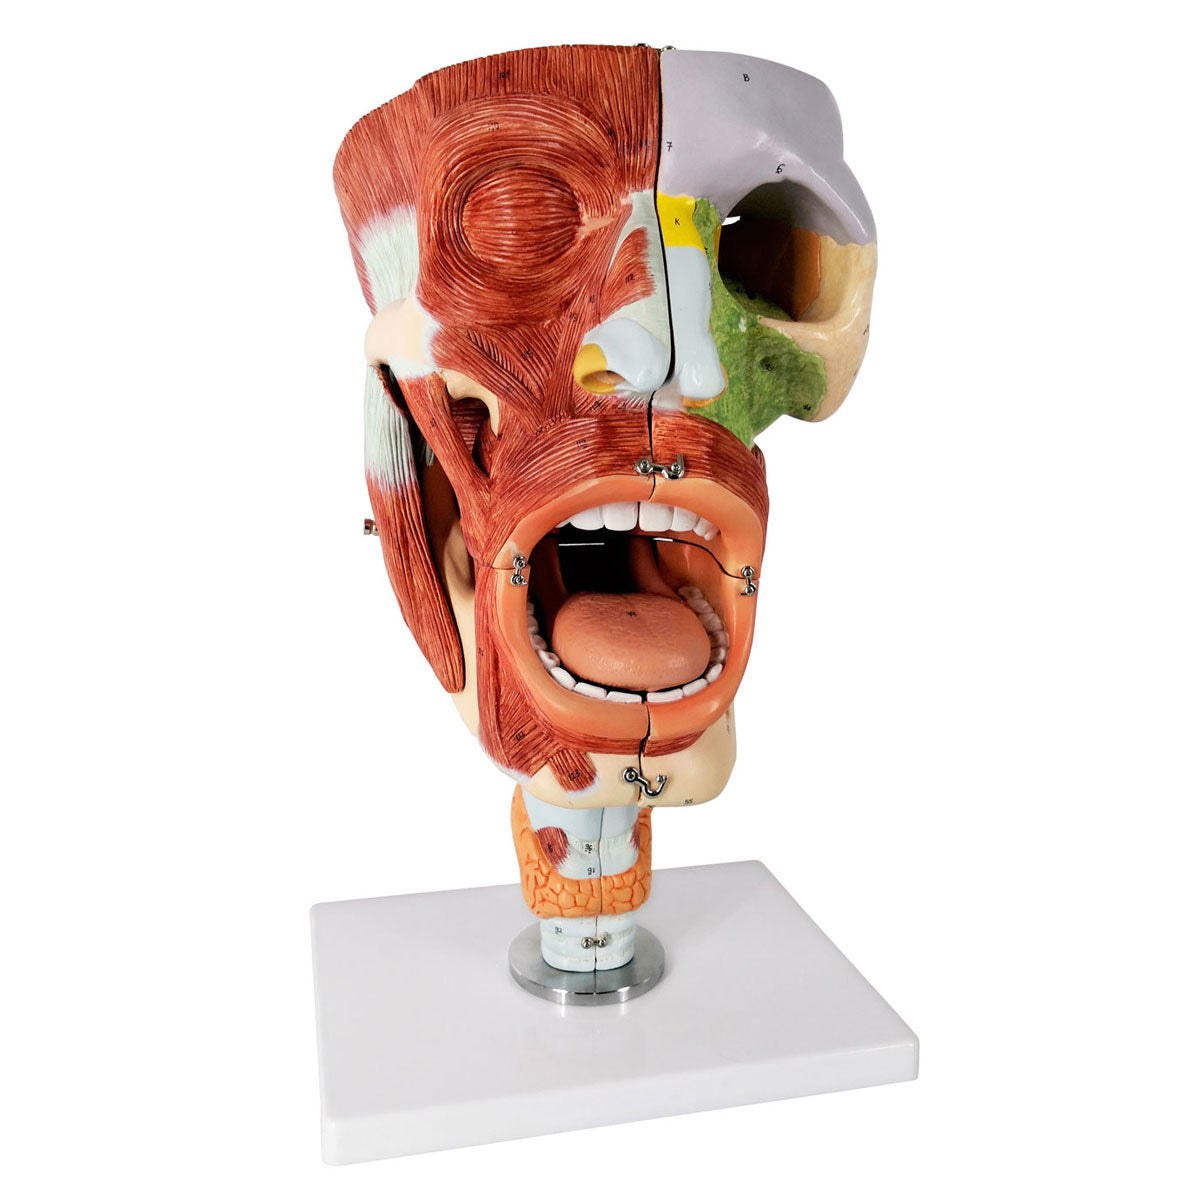 Evotech Scientific Deluxe Cavities of the Nose, Mouth and Throat with Larynx, 2x Life Size, 10 Parts